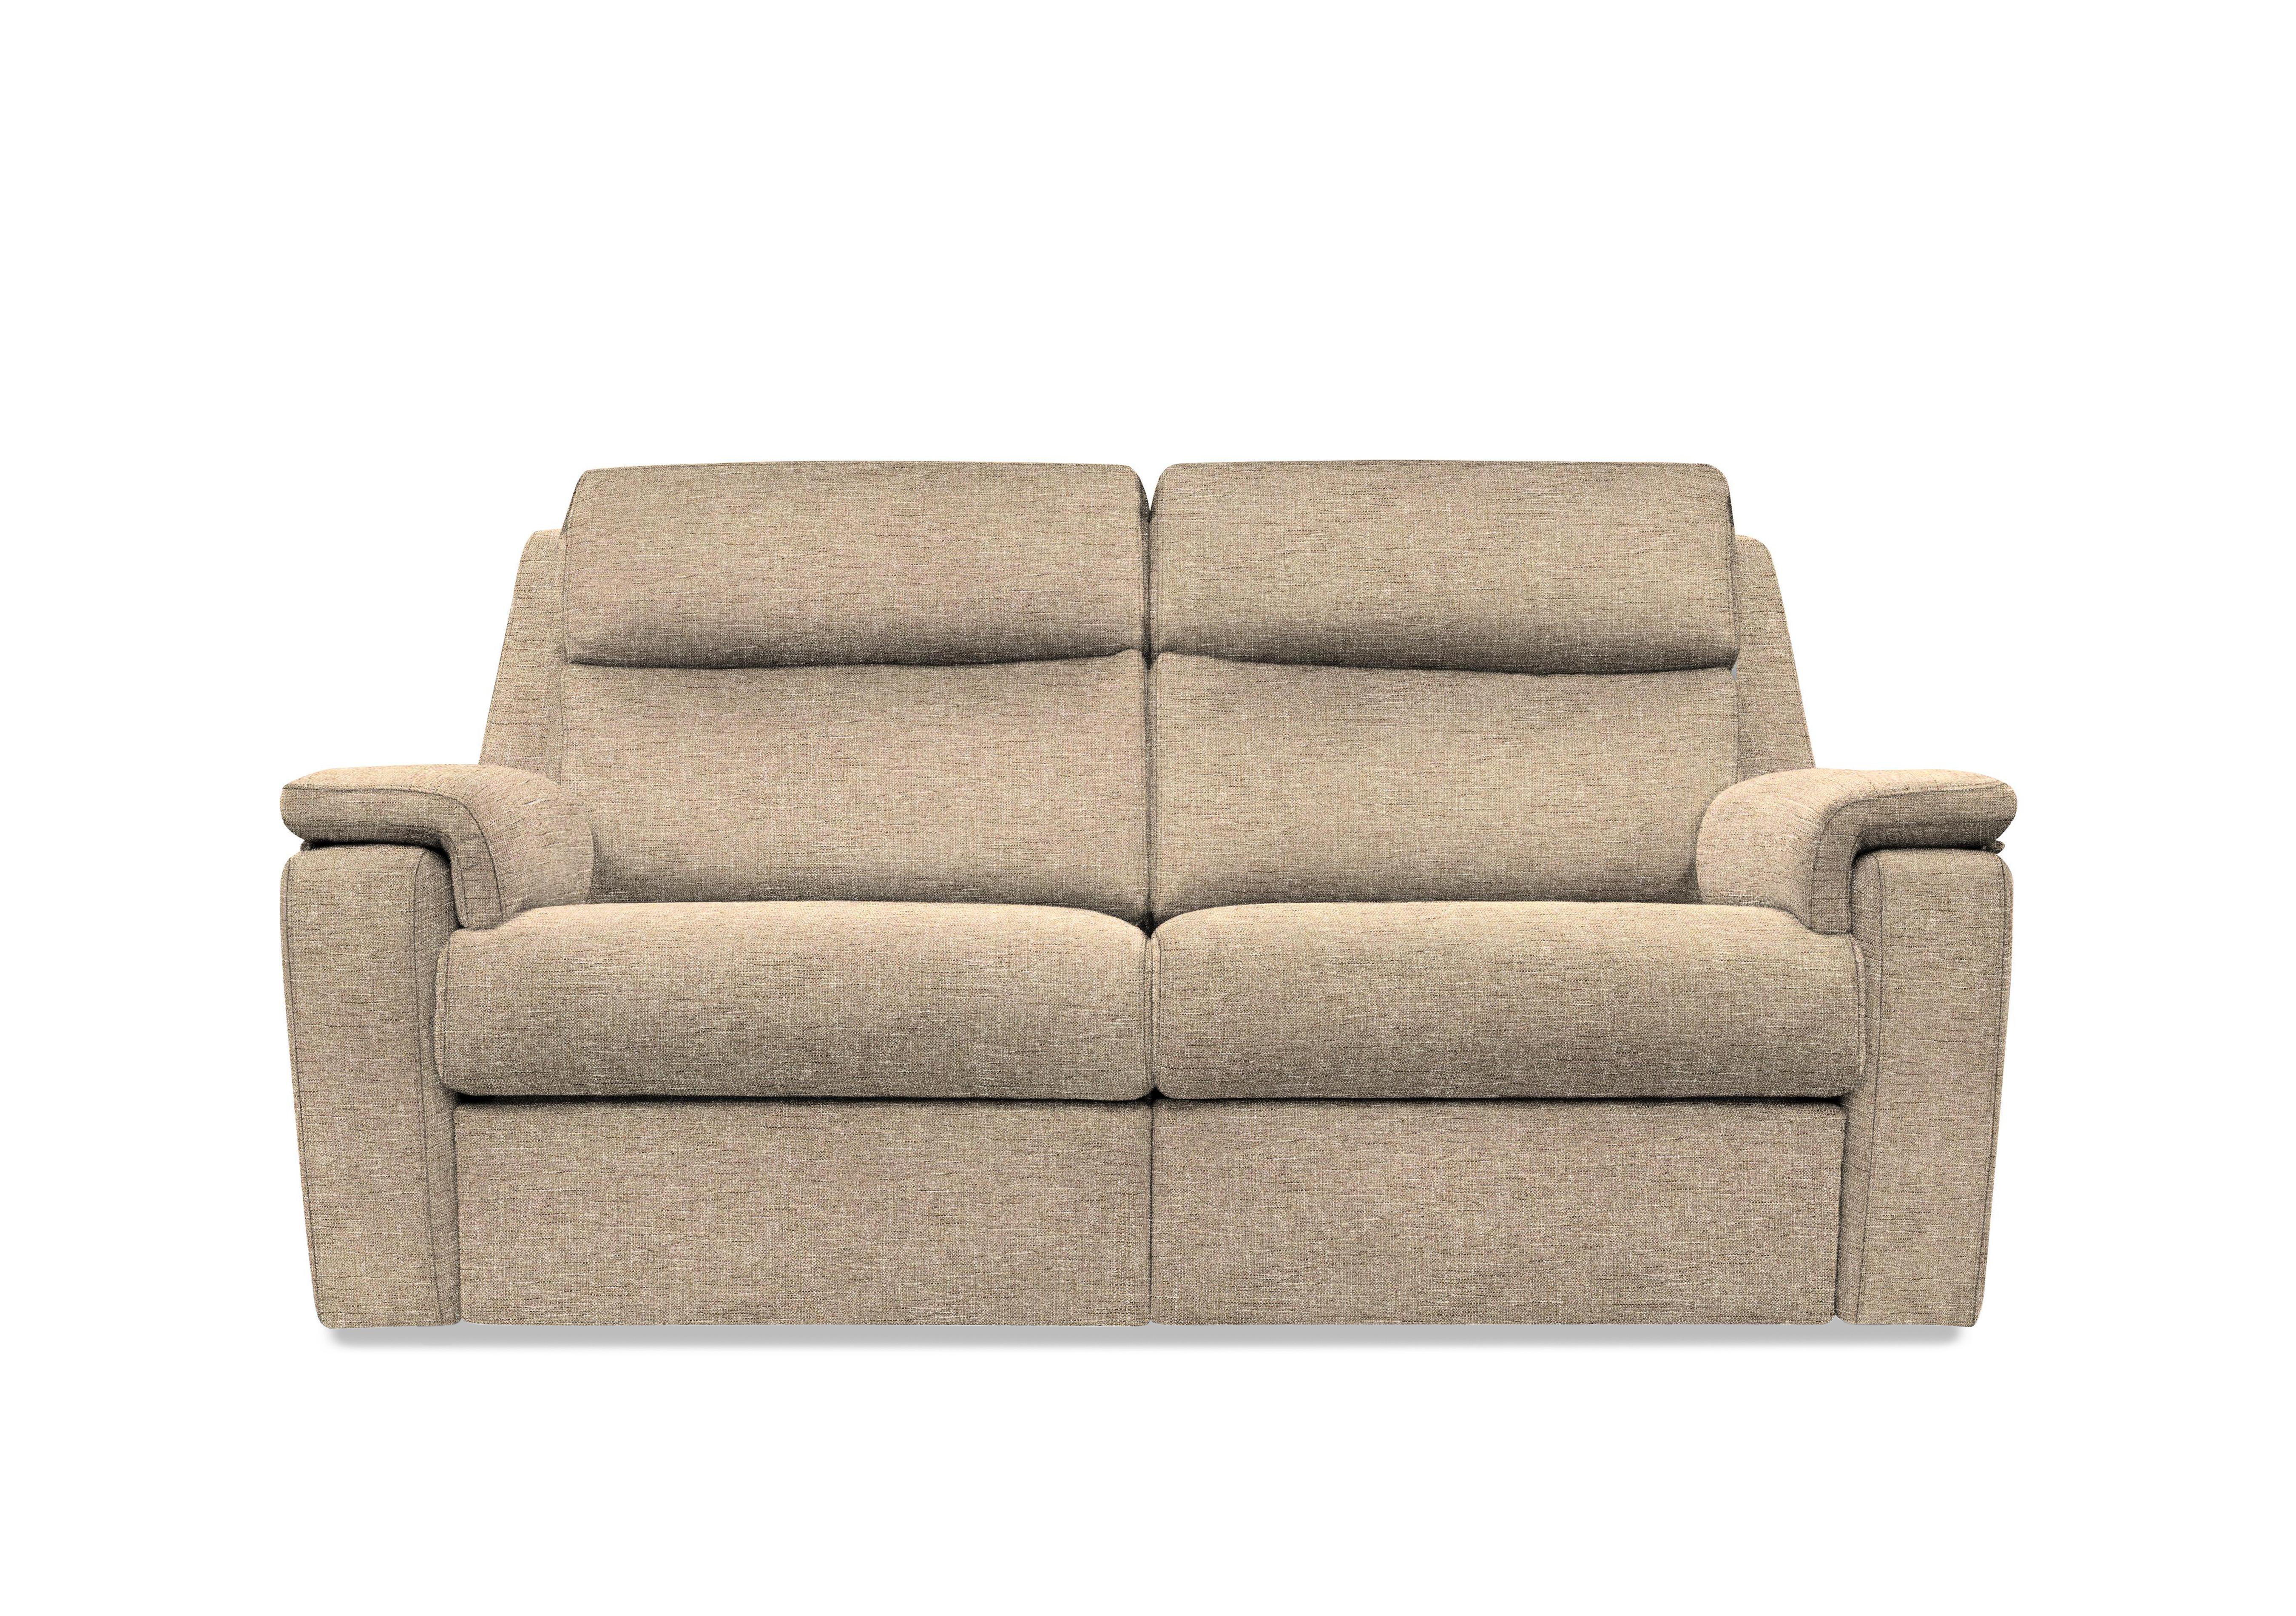 Thornbury 3 Seater Fabric Power Recliner Sofa with Power Headrests and Power Lumbar in A022 Dapple Sparrow on Furniture Village